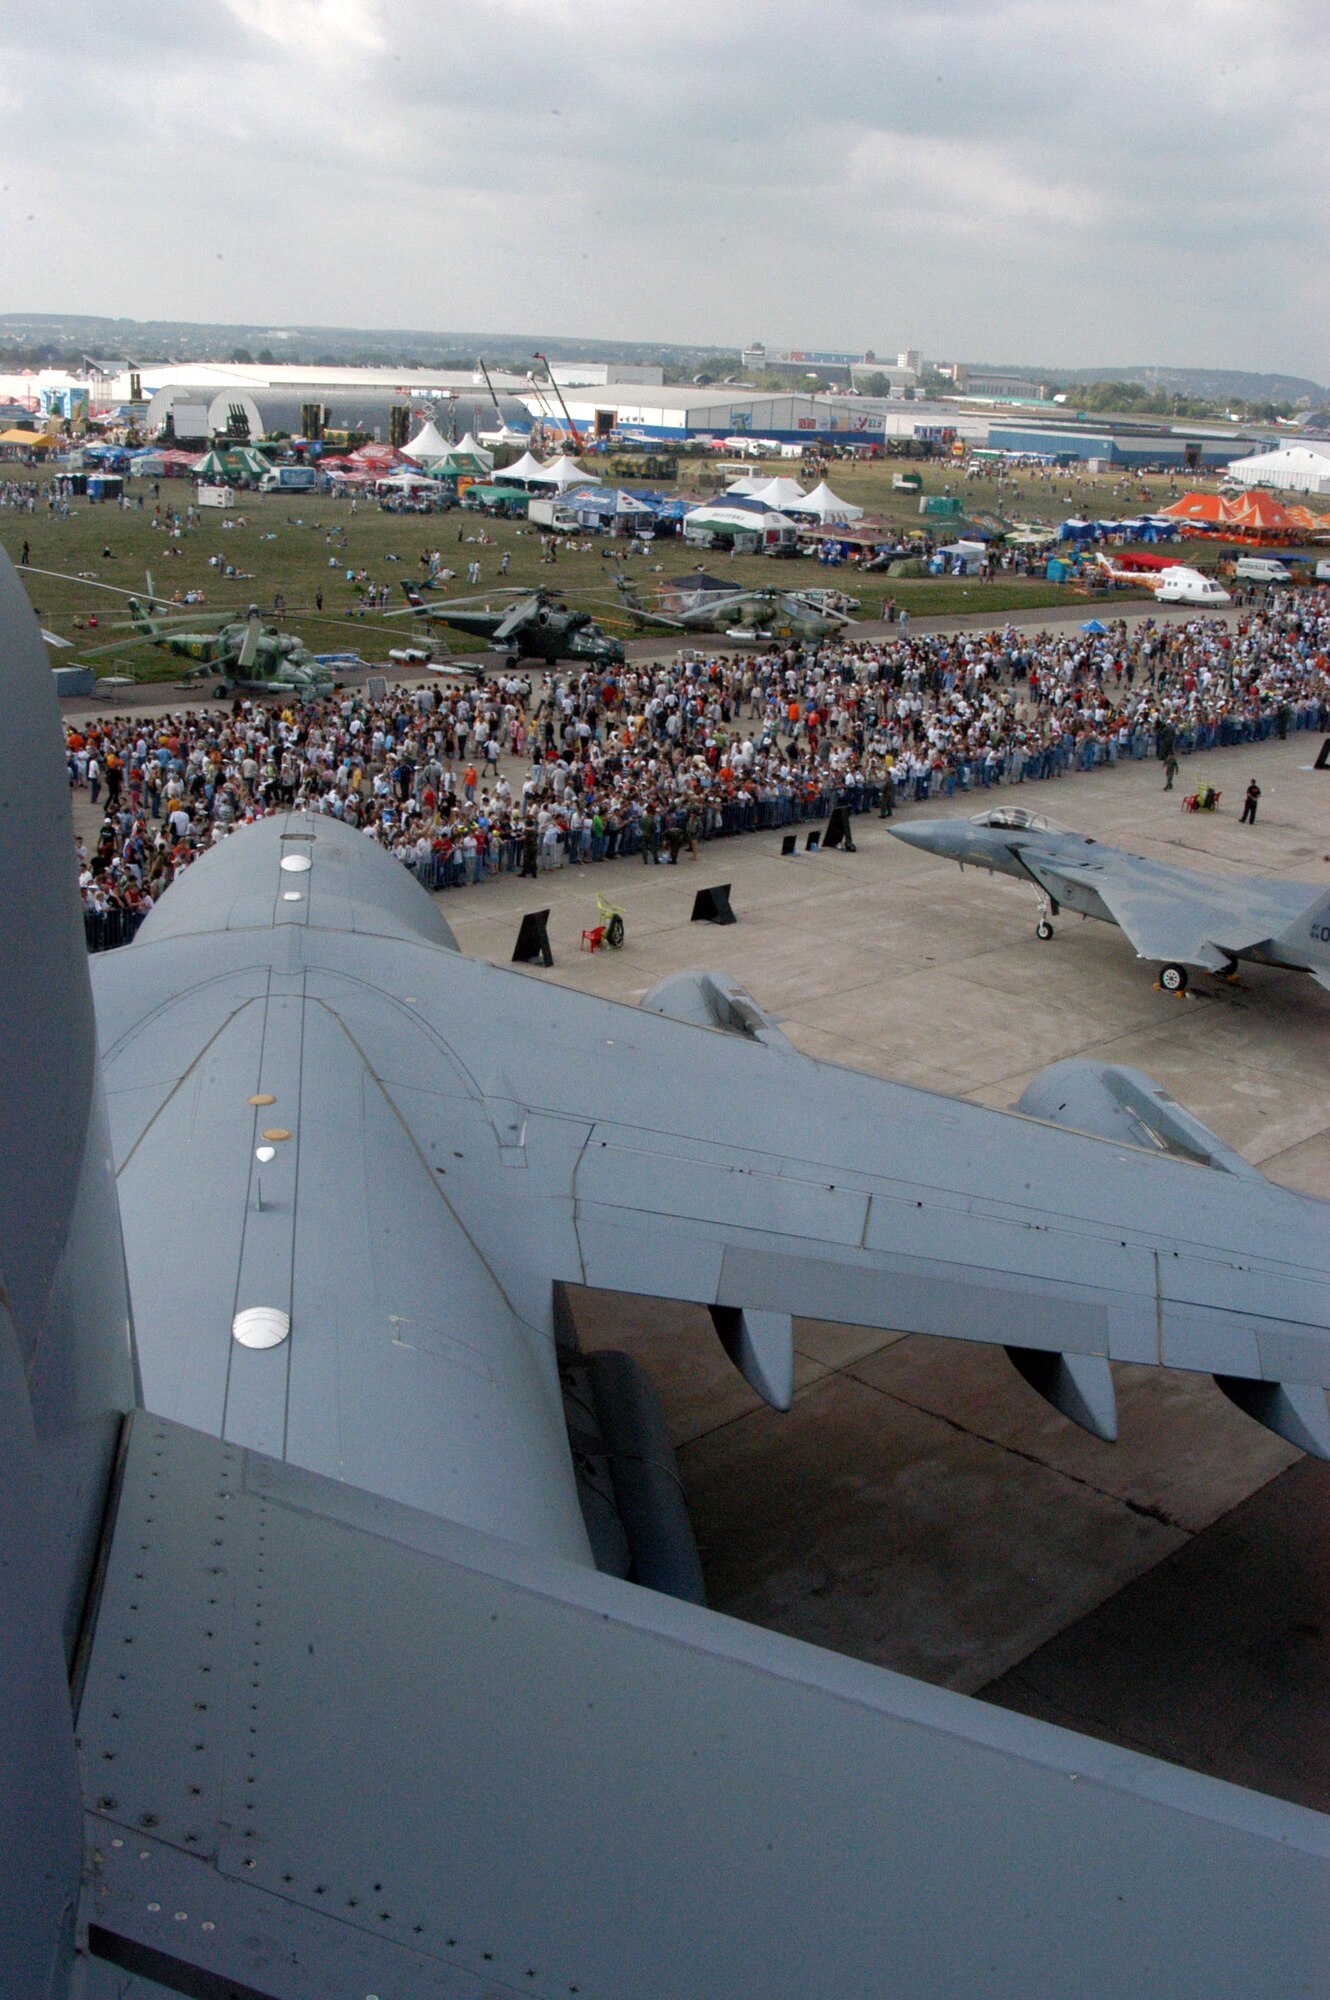 A view from the tail of the C-17 Globemaster III shows just some of the thousands of people who visited the Moscow International Air Show Aug. 26 in Zhukovsky, Russia. A KC-135 Stratotanker from Royal Air Force Mildenhall, England; an F-15 Eagle from RAF Lakenheath, England; a B-52 from Barksdale Air Force Base, La.; a C-17 Globemaster II from McChord AFB, Wash., and two F-16 Fighting Falcons from Spangdahlem Air Base, Germany, were on static display at the air show, along with many other aircraft from all over the world. The air show began Aug. 21 and concluded Aug. 26, and had more than 500,000 visitors. (U.S. Air Force photo/Maj. Pamela A.Q. Cook) 
